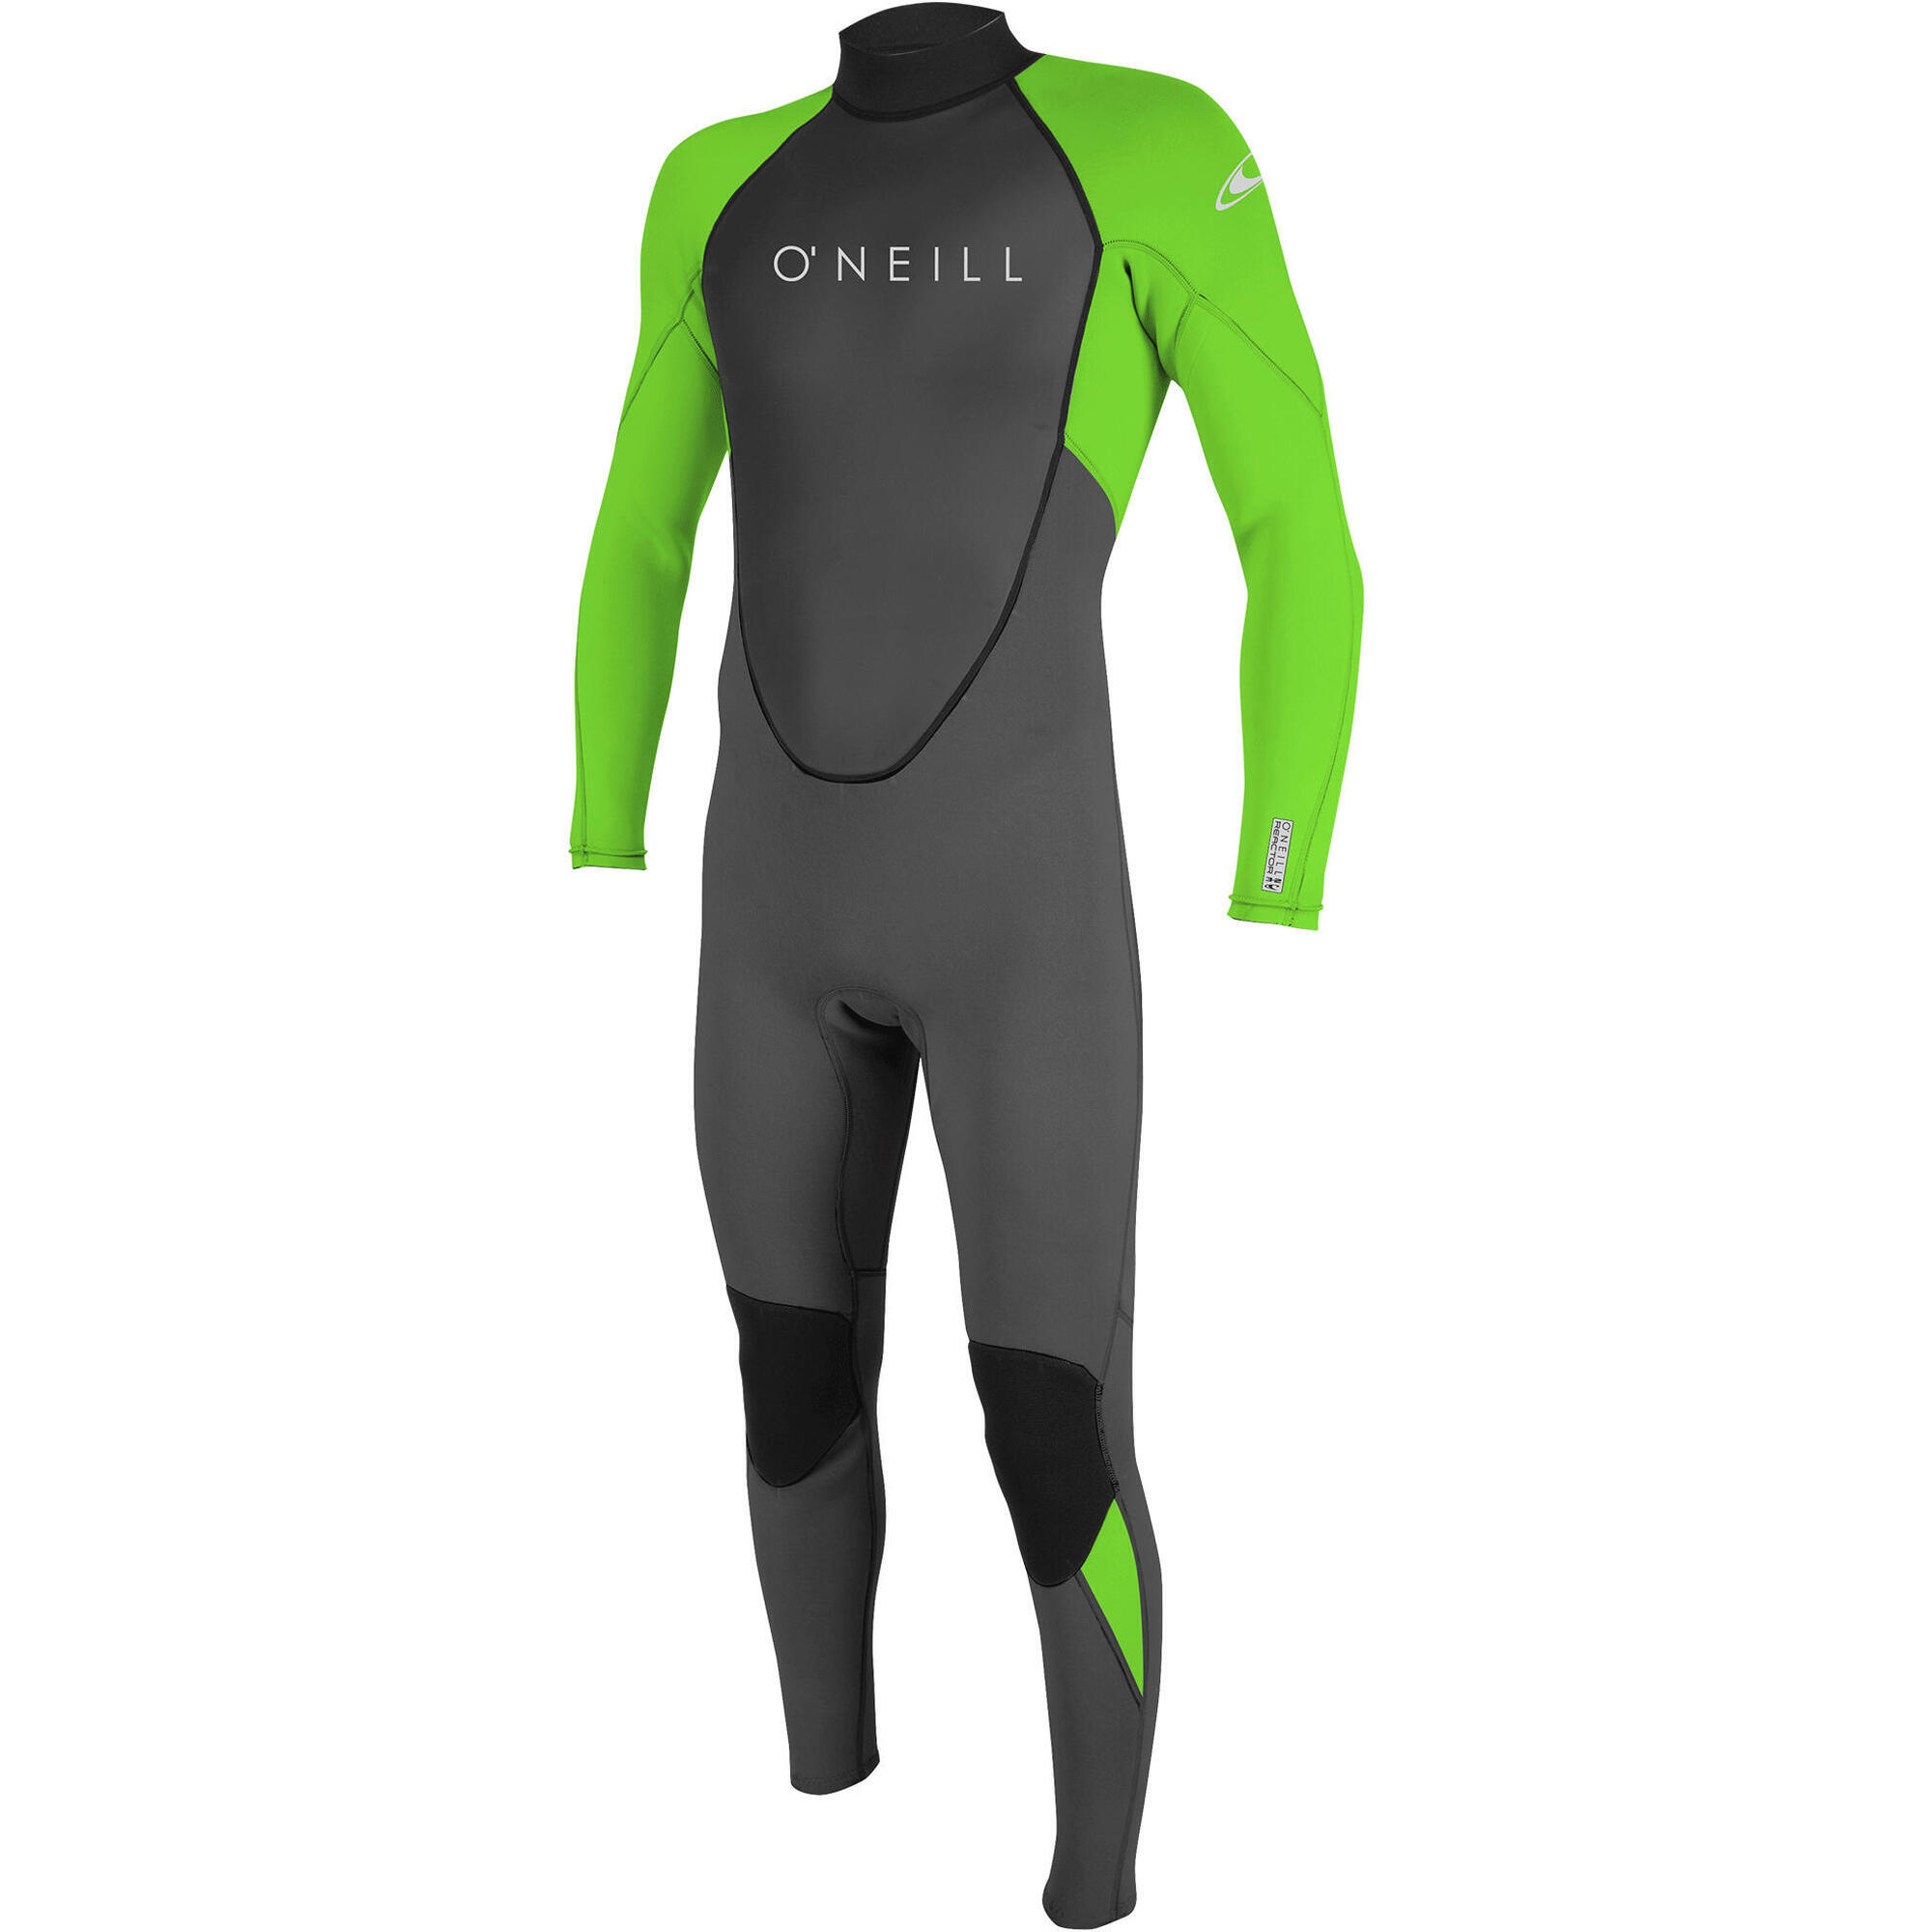 Photos - Wetsuit ONeill O'neill Youth Reactor Ii 3/2mm Back Zip  - Graphite / Dayglo 